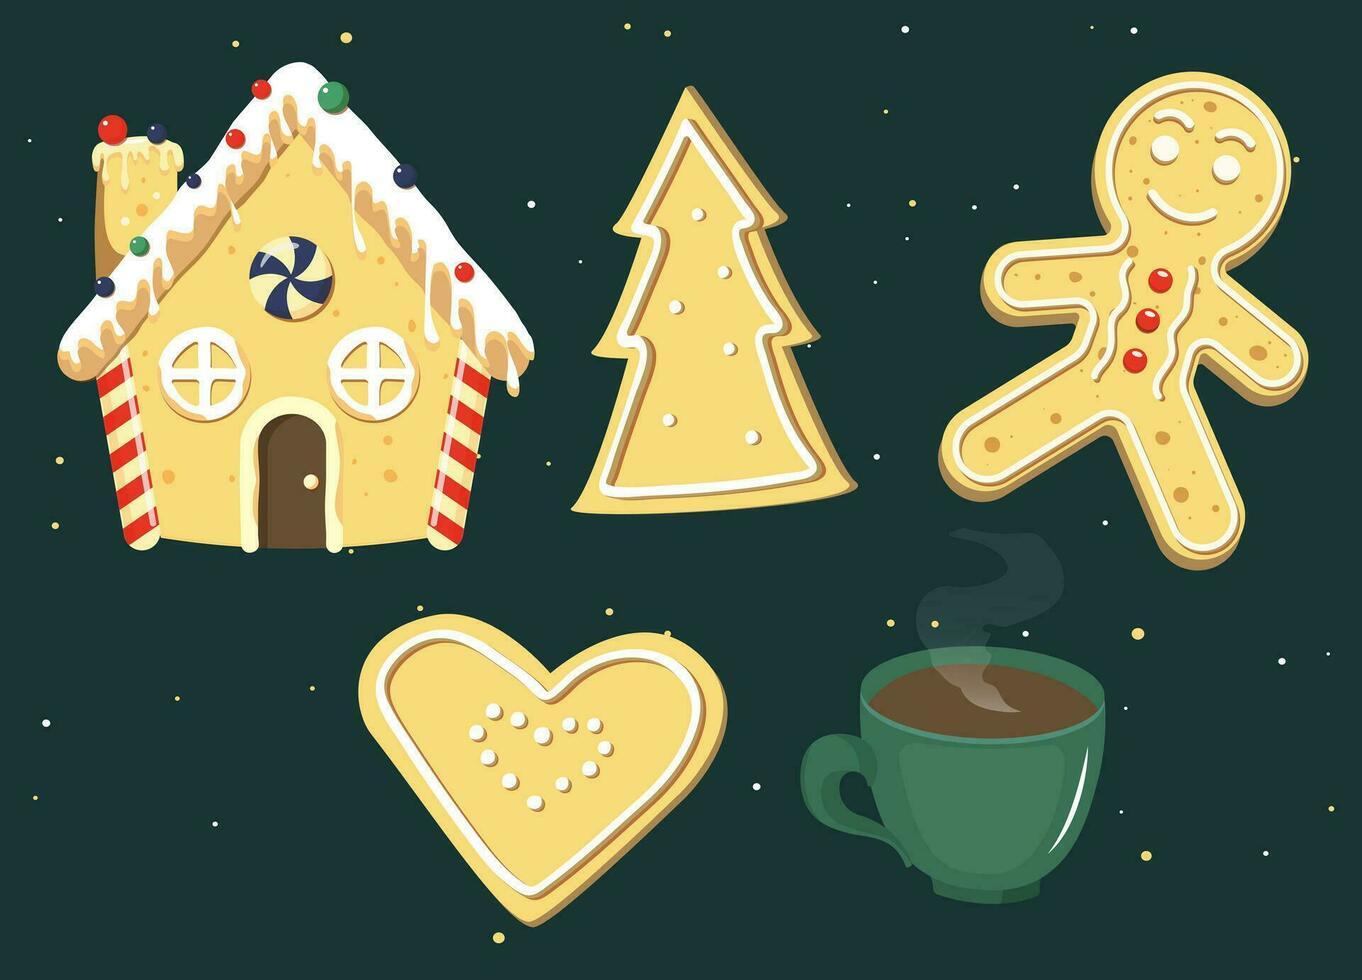 Xmas Gingerbread cookies. Cute ginger bread men, house, heart, tree. Christmas Classic biscuit. vector